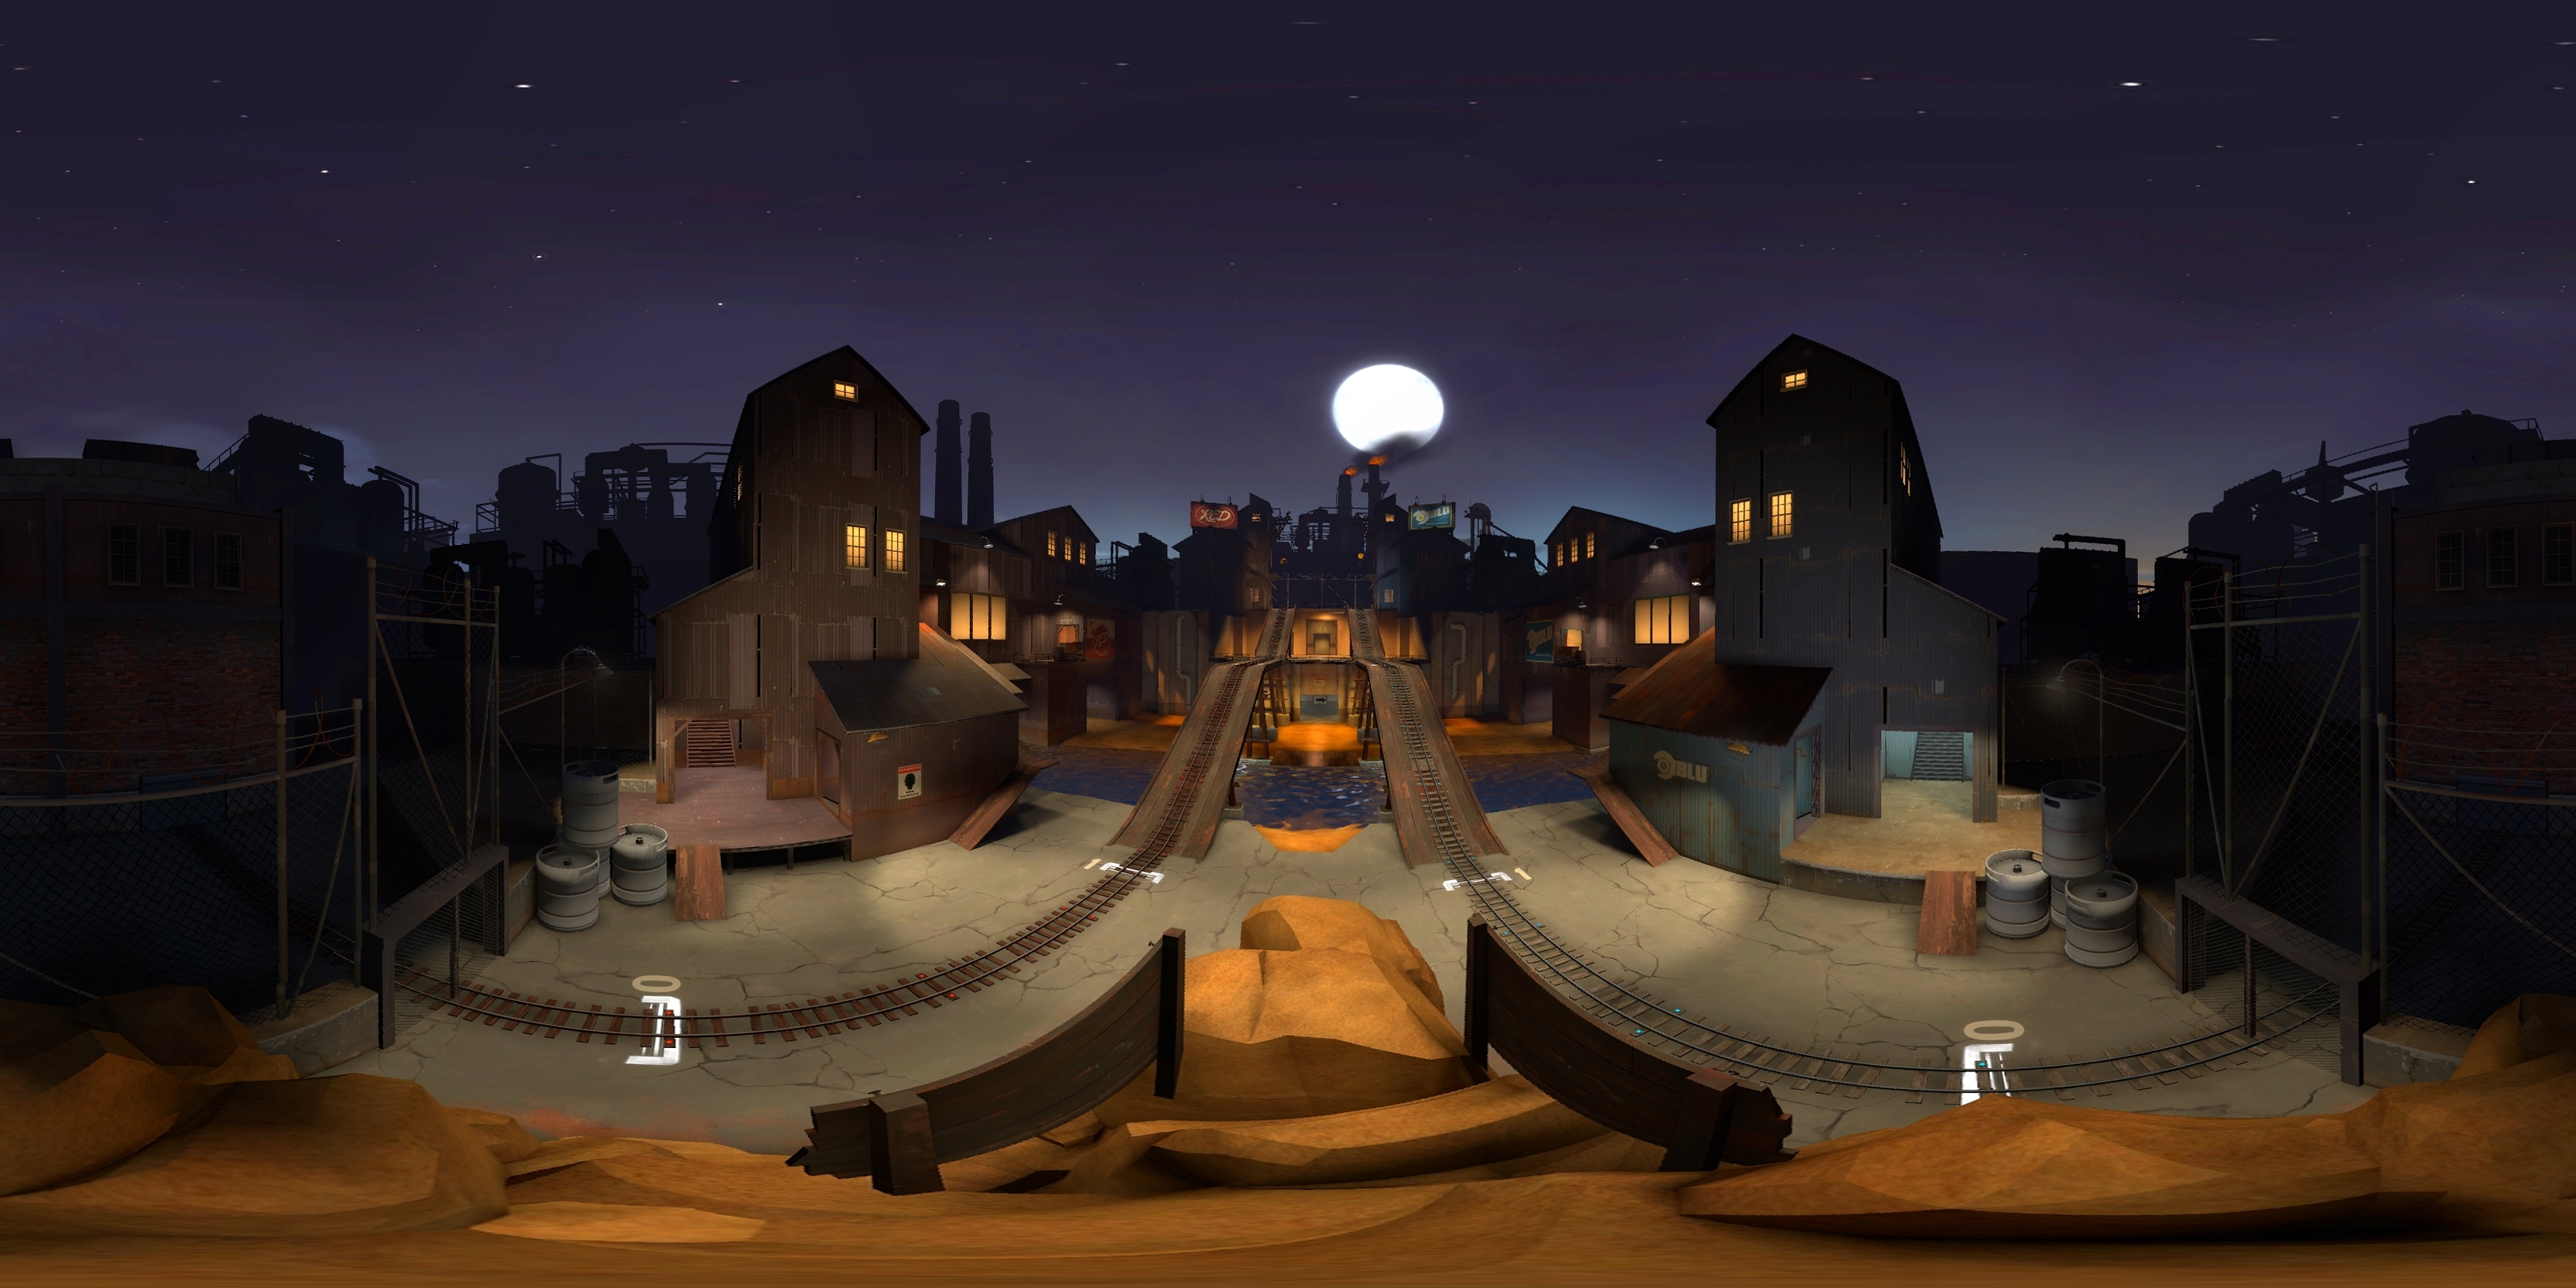 Team_Fortress_2_Panoramic_31_by_sorrow2201.jpg